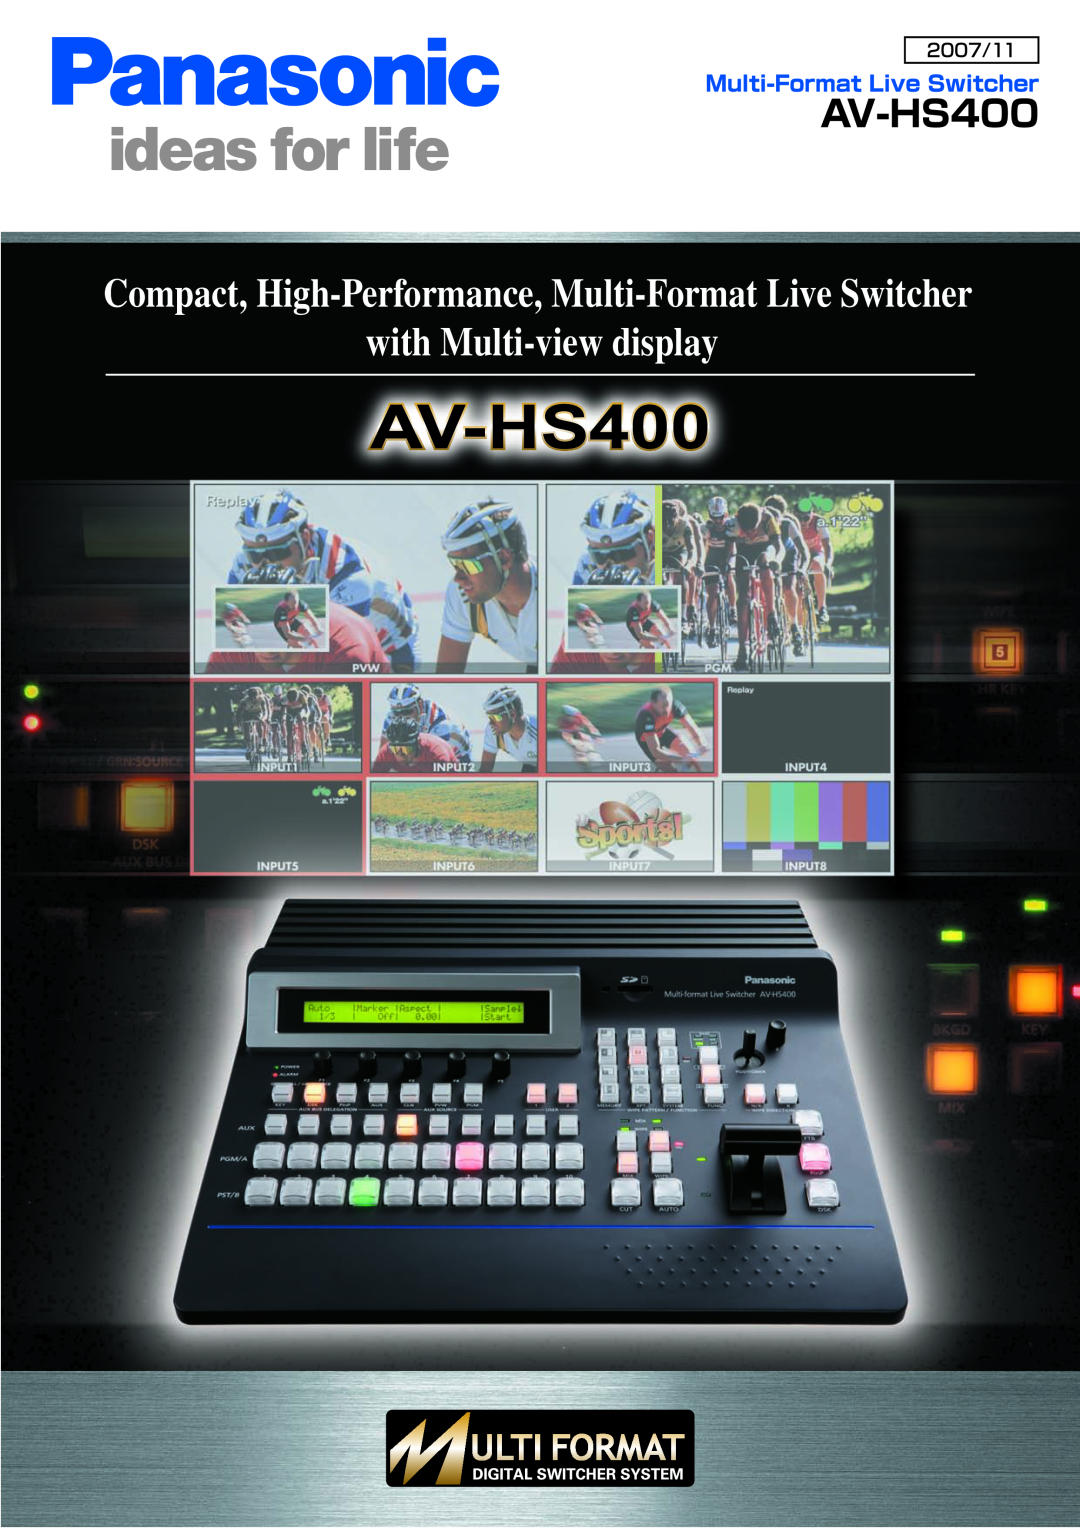 Panasonic AV-HS400 manual with Multi-view display, Compact, High-Performance, Multi-Format Live Switcher 